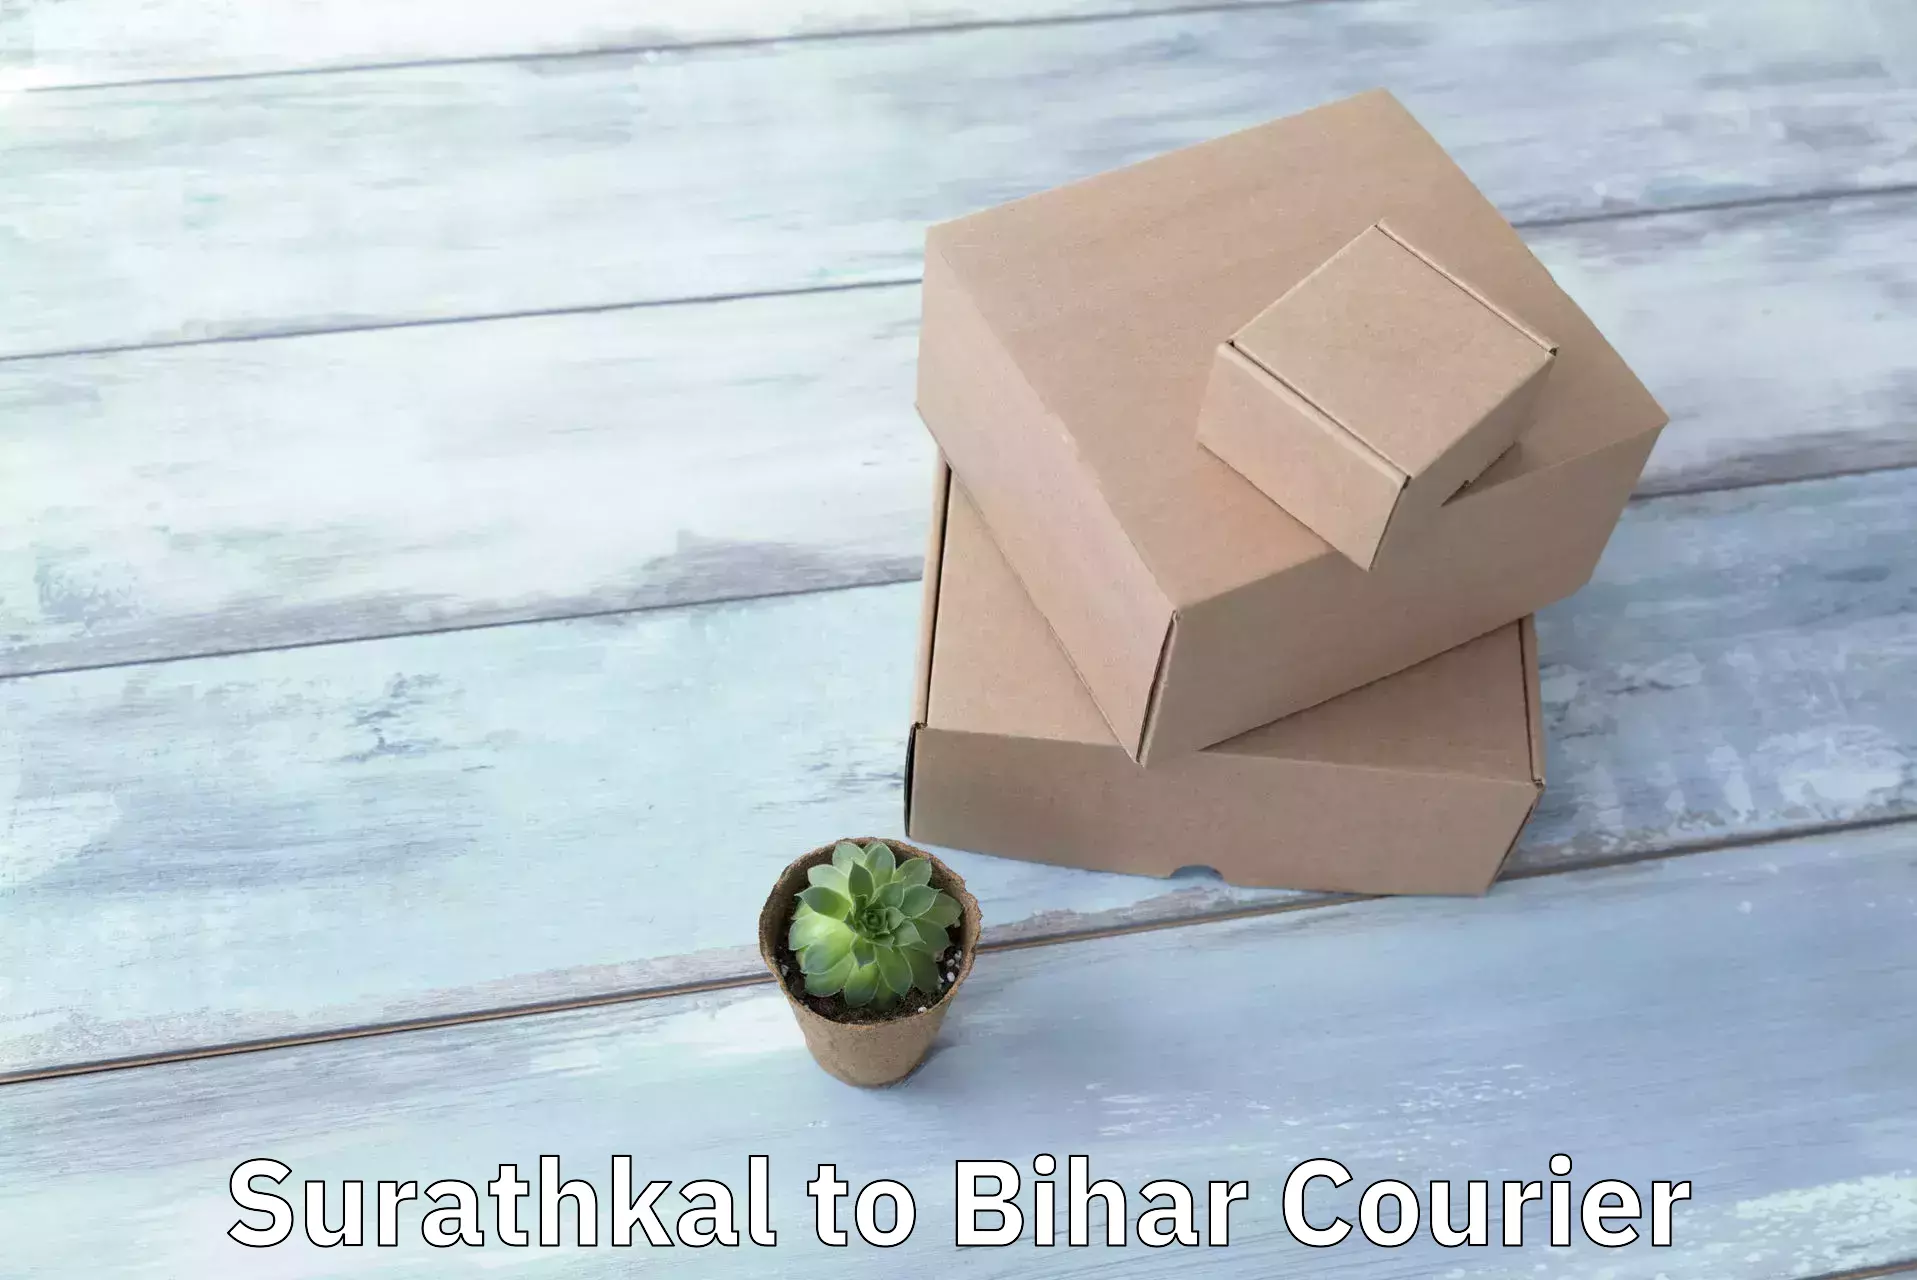 Sustainable shipping practices Surathkal to Bihar